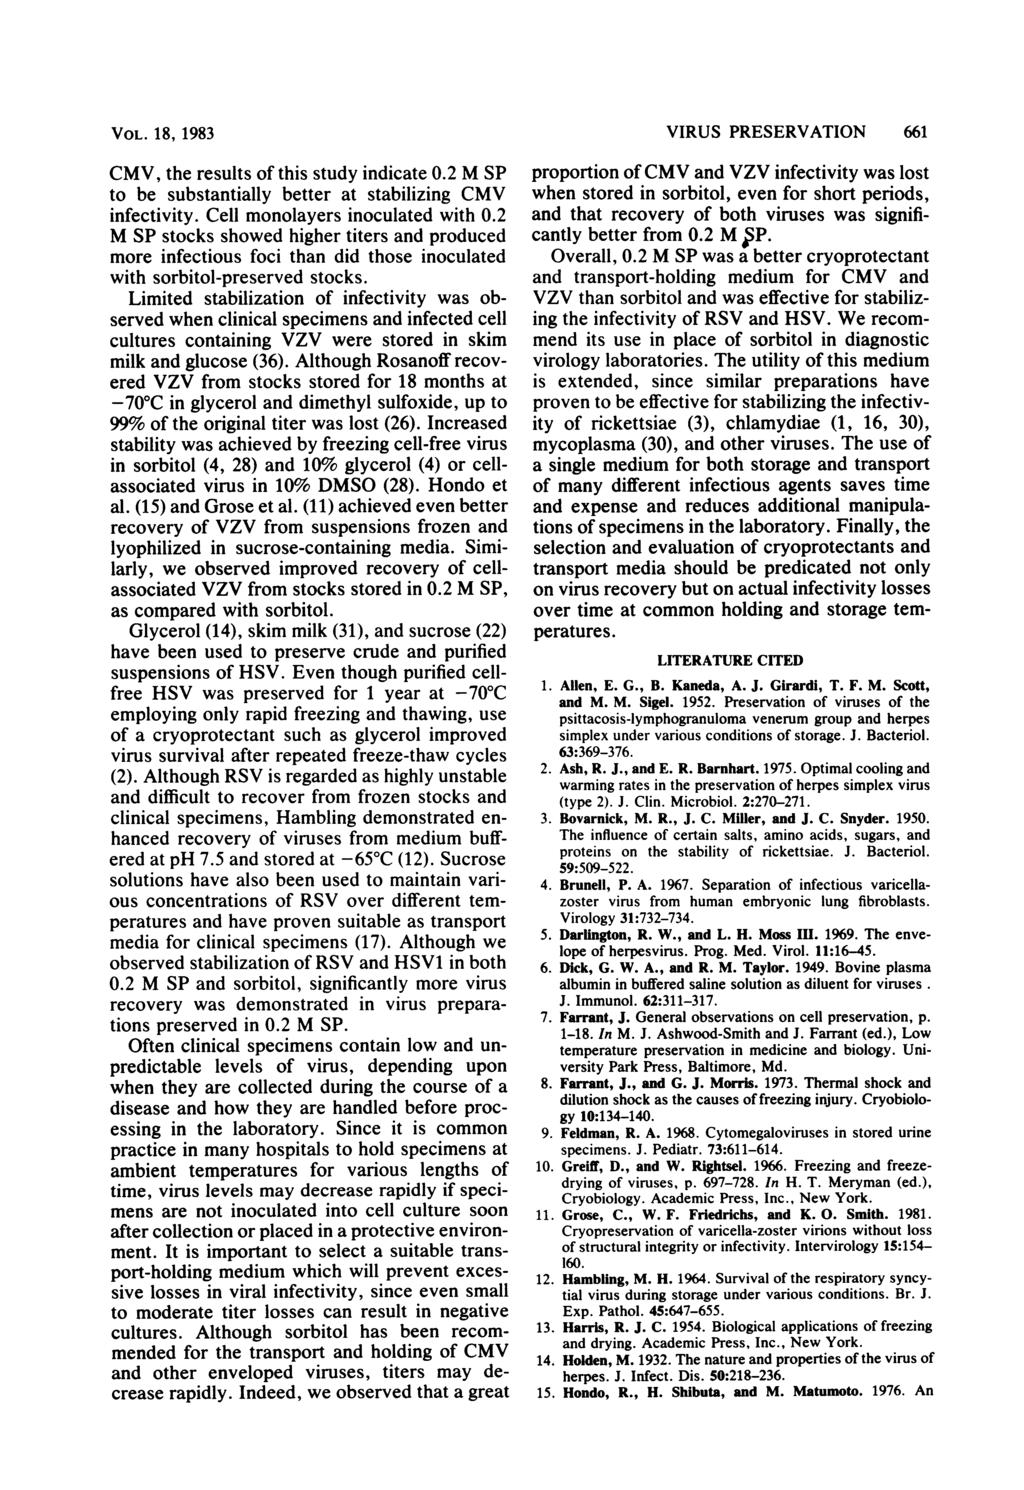 VOL. 18, 1983 CMV, the results of this study indicate 0.2 M SP to be substantially better at stabilizing CMV infectivity. Cell monolayers inoculated with 0.